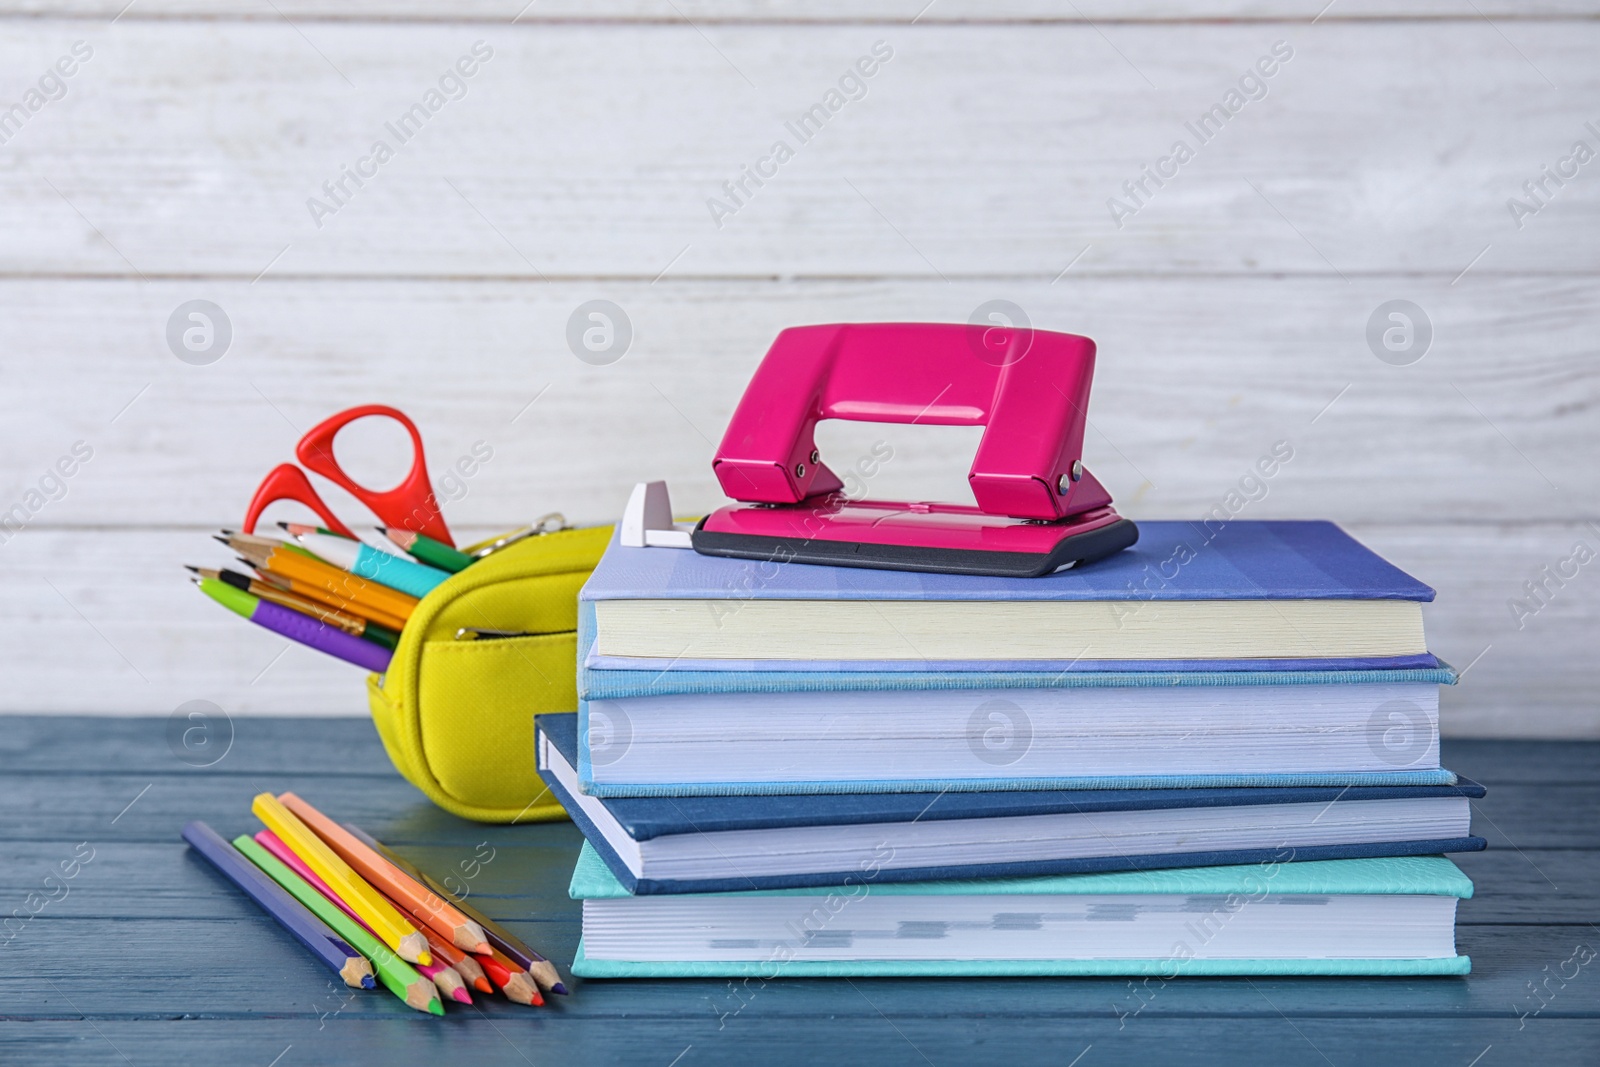 Photo of Different school stationery on table against light background